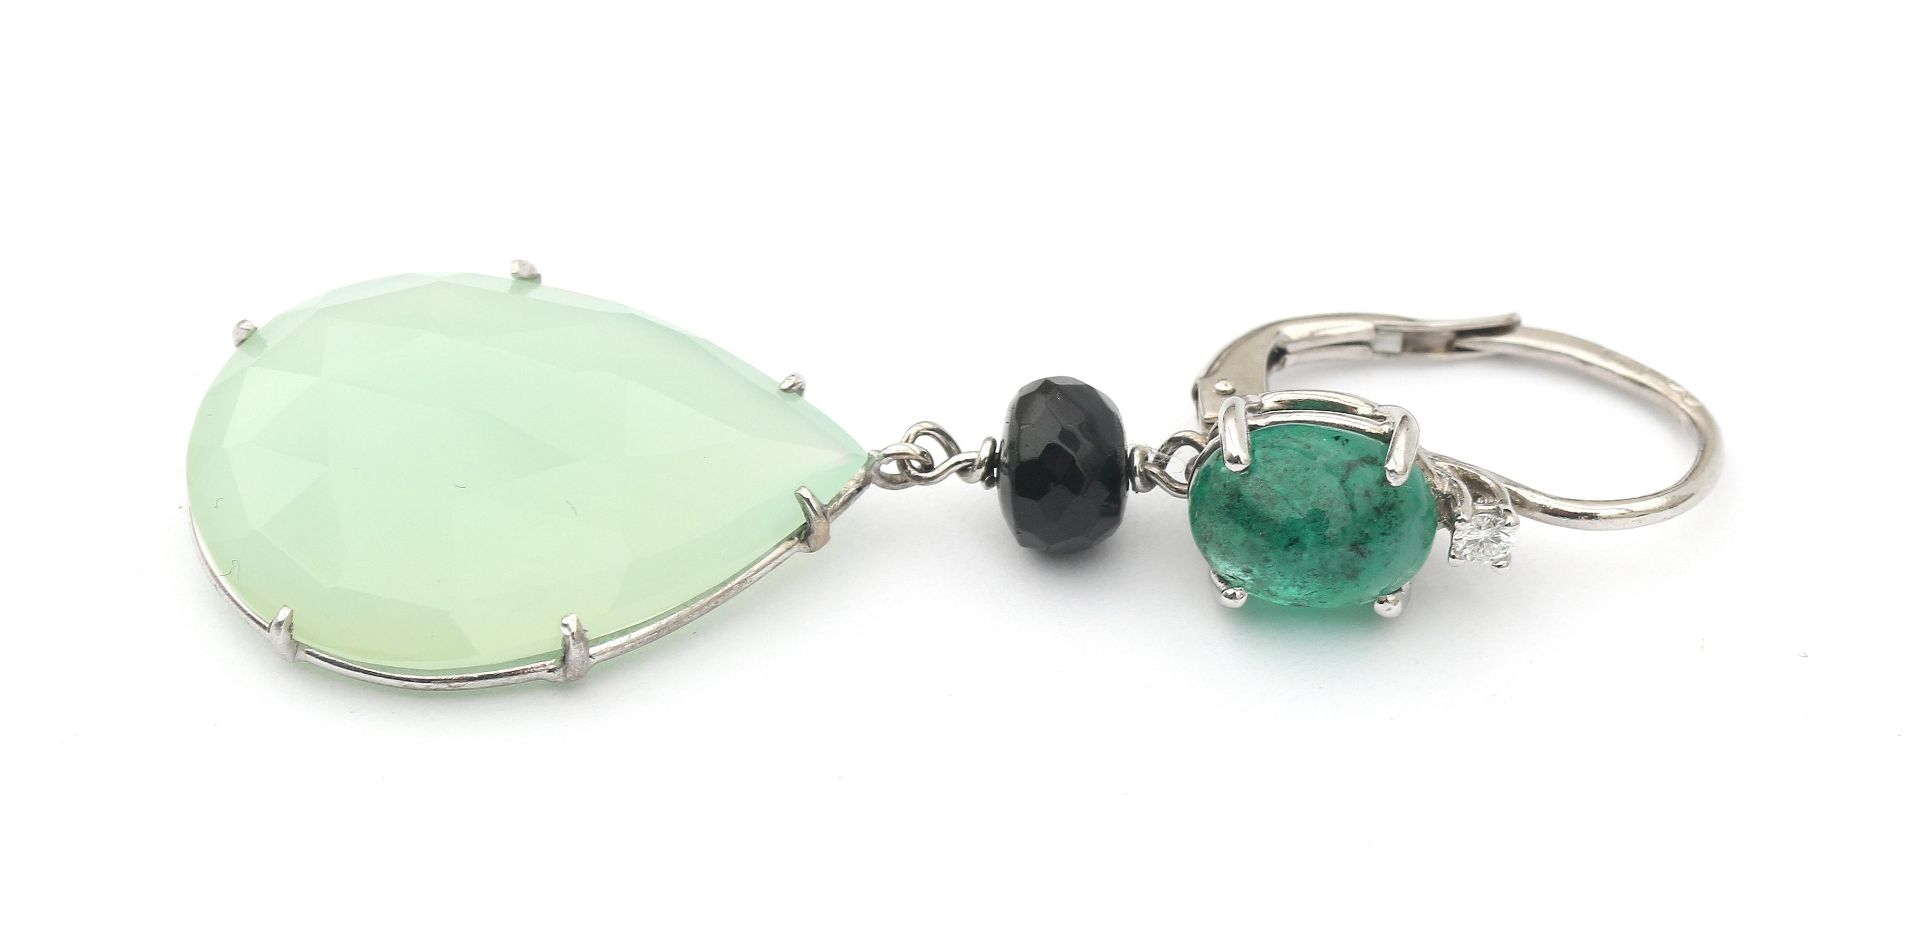 A pair of 18 karat white gold agate and emerald earrings - Image 2 of 2